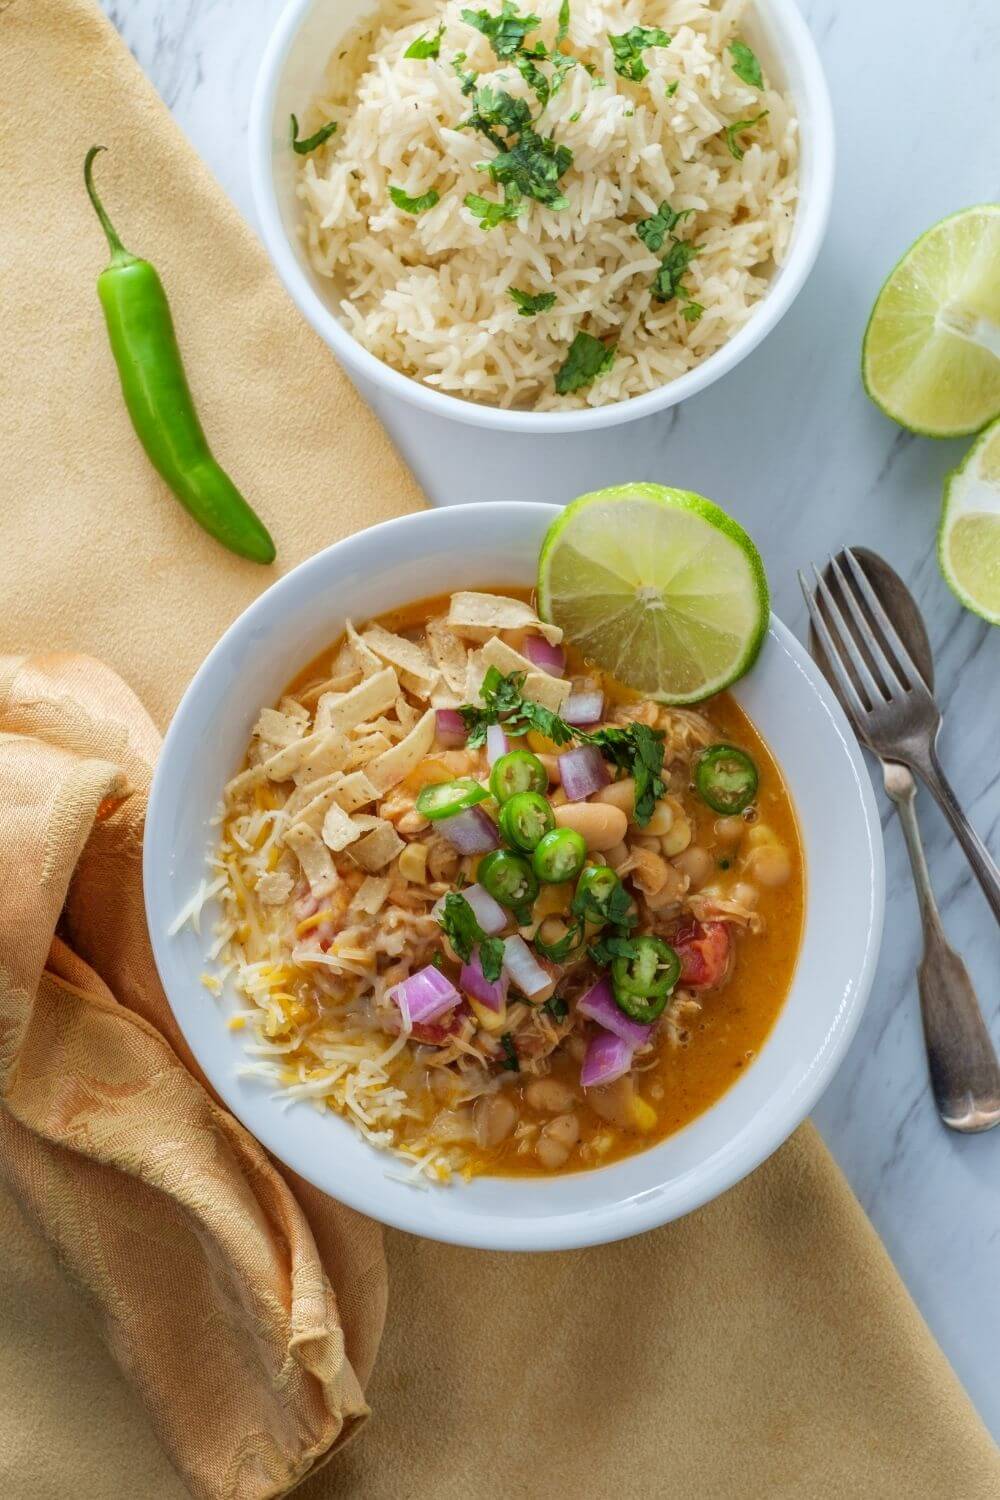 What to Serve with White Chicken Chili